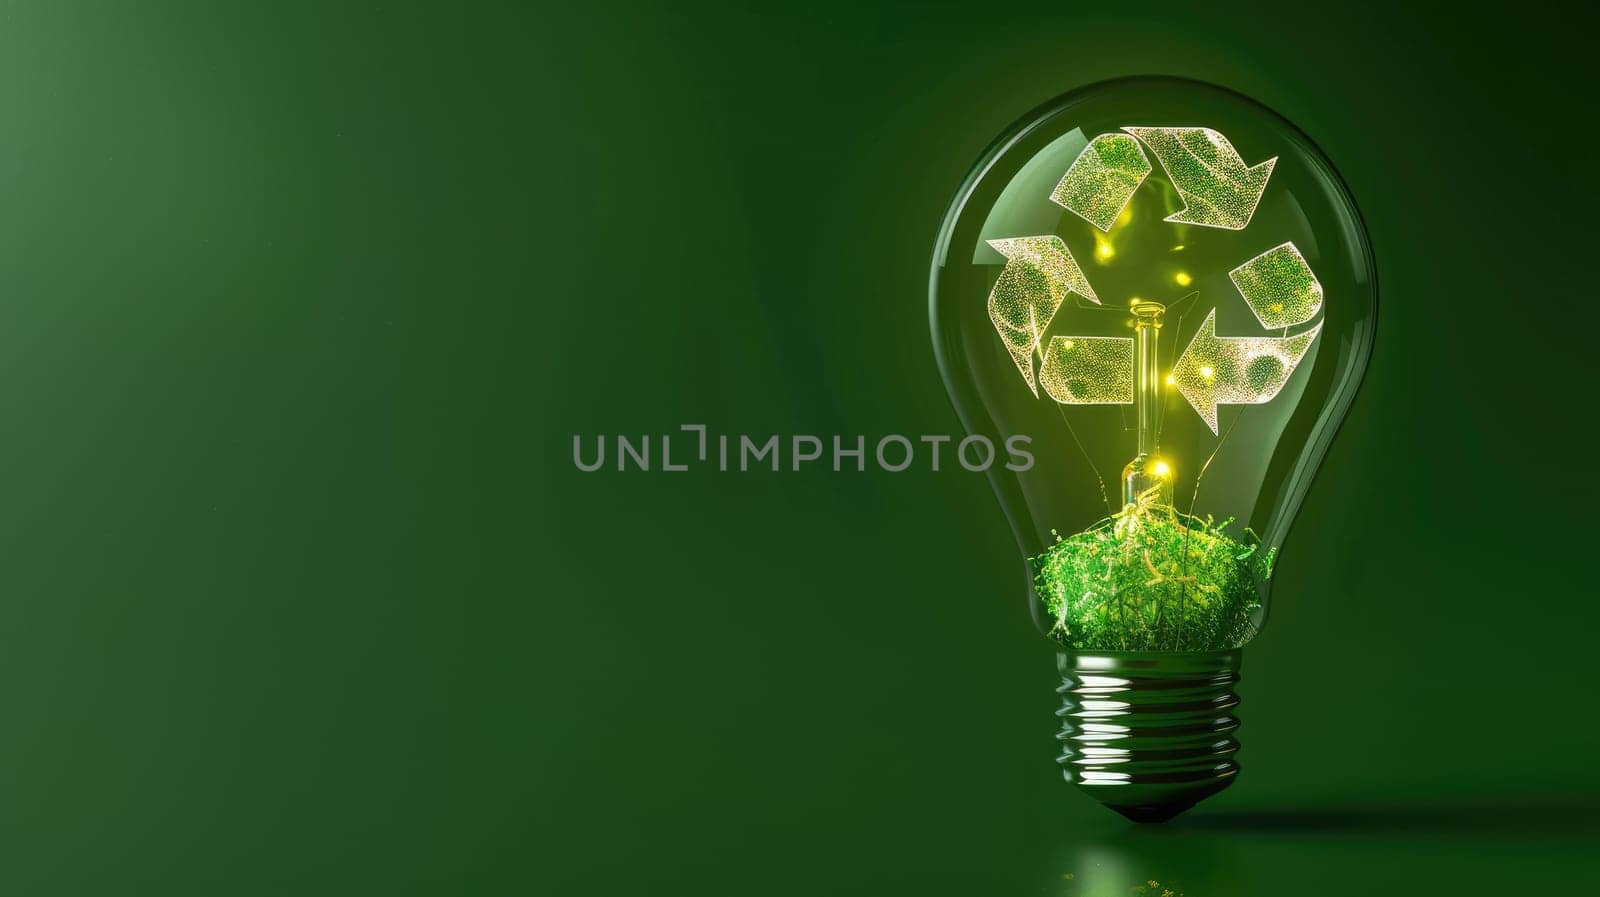 A light bulb with a green recycling symbol on it.